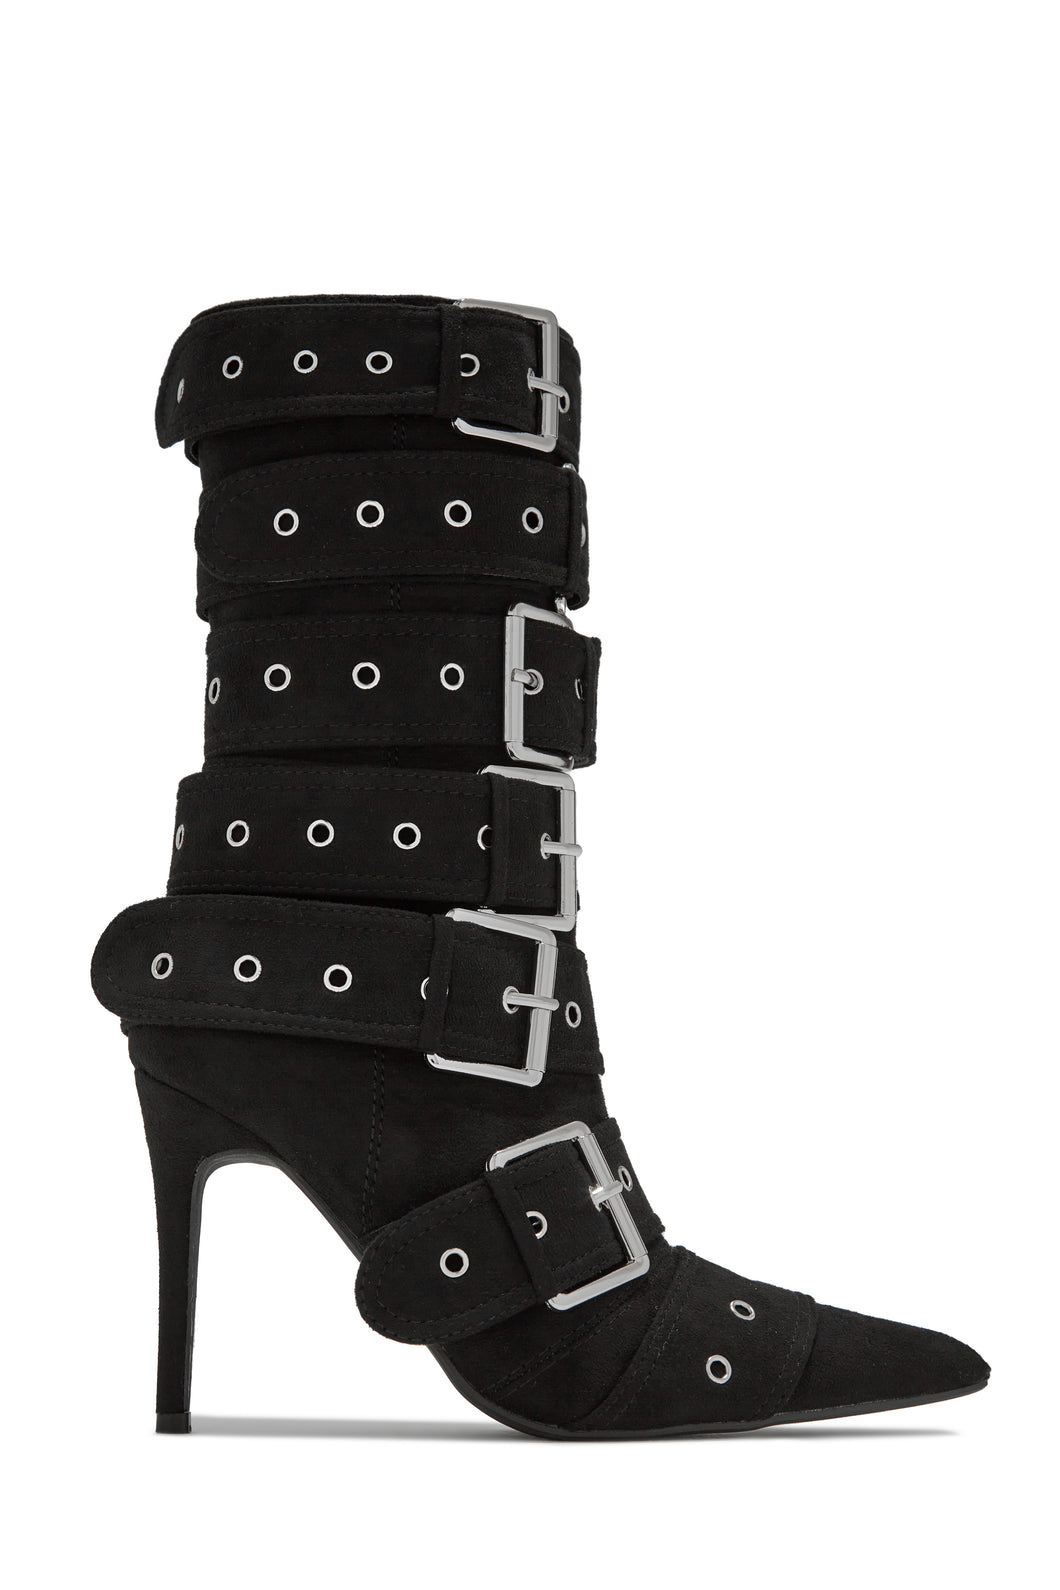 Camille Above The Ankle High Heel Boots - Black